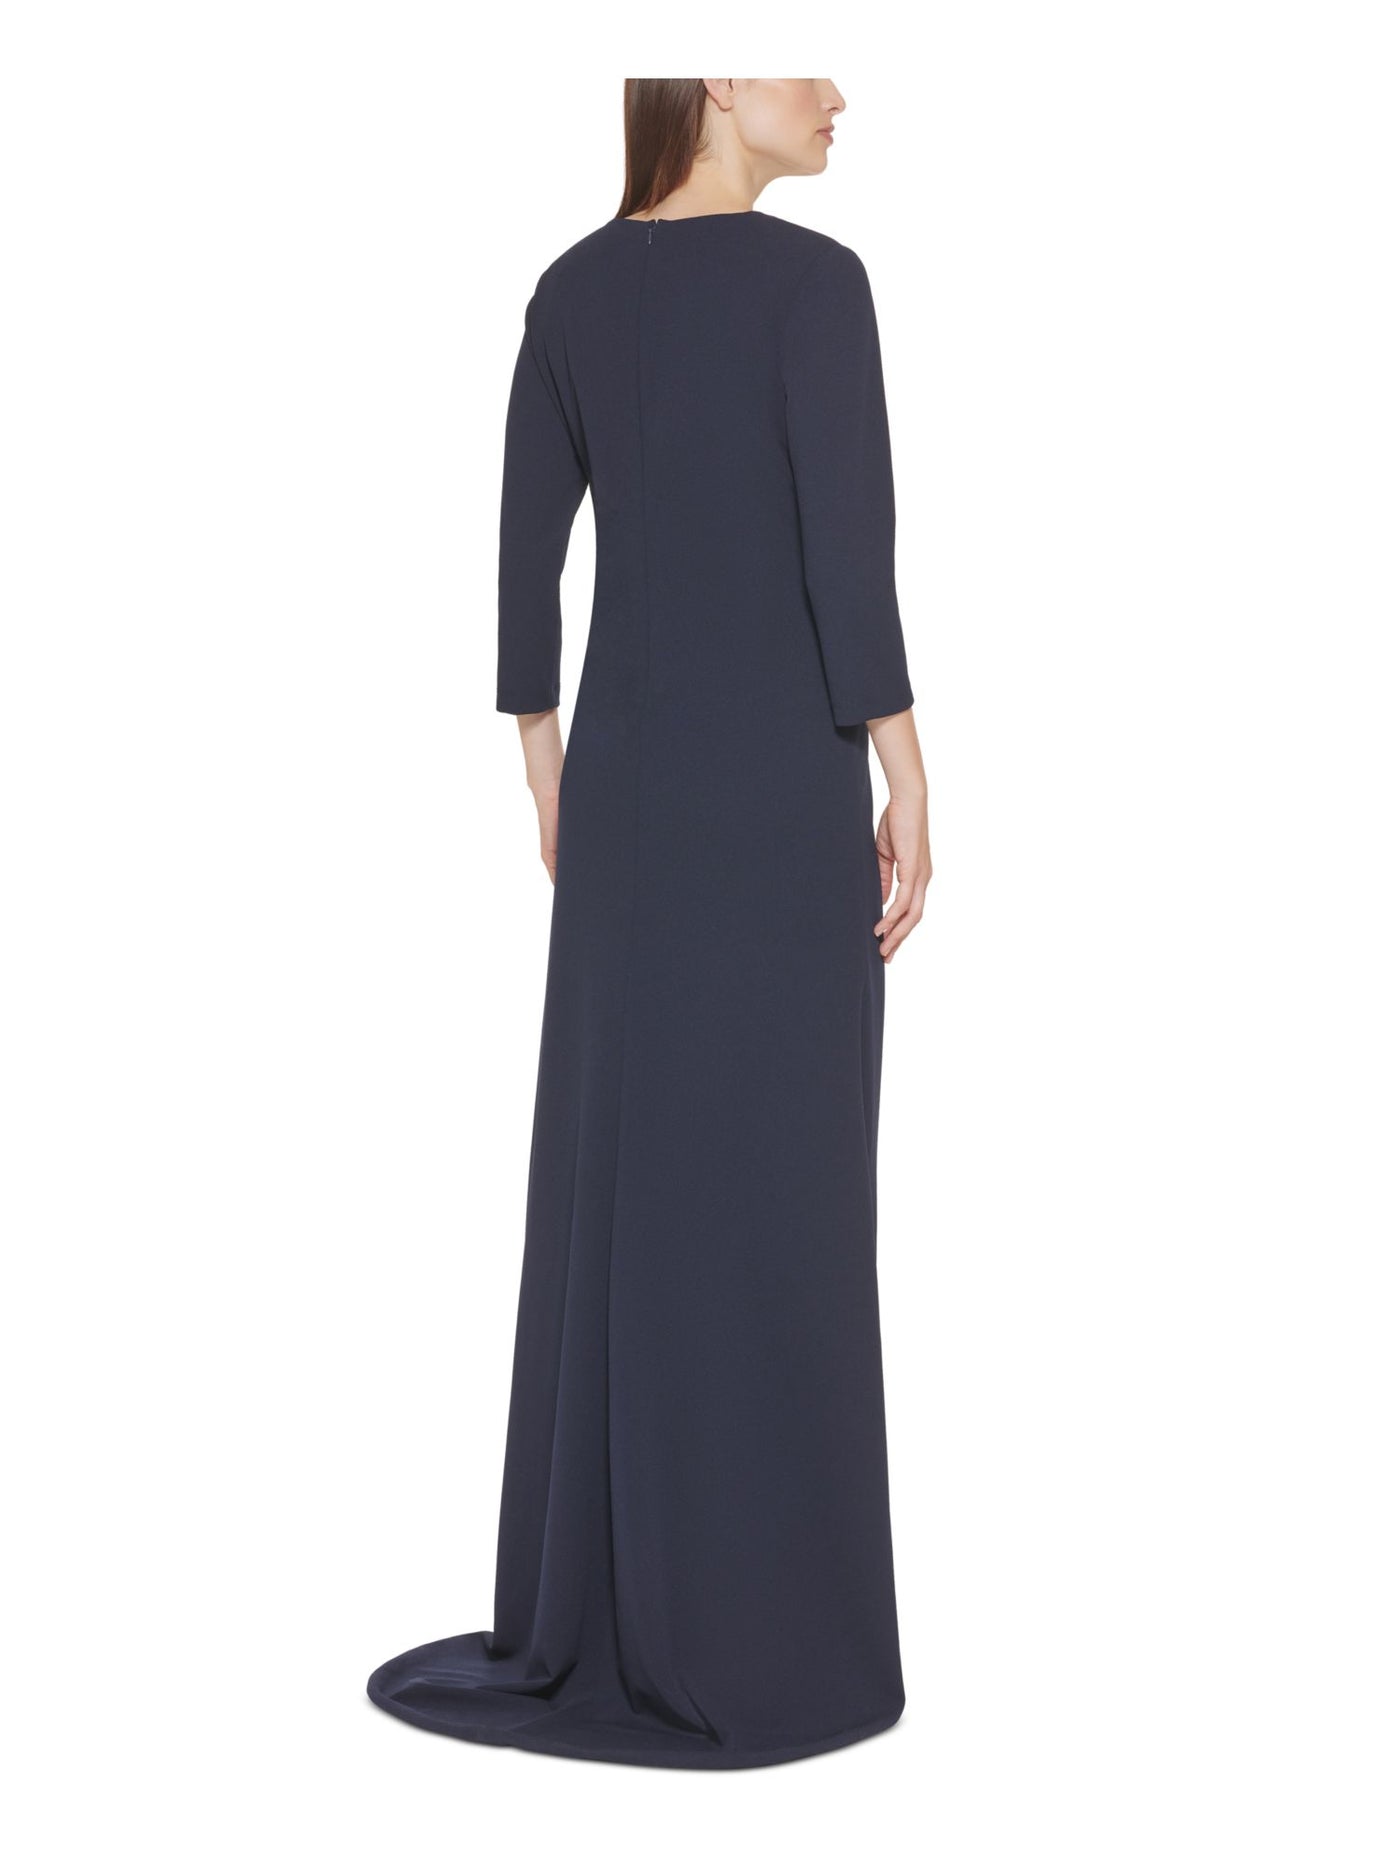 CALVIN KLEIN Womens Navy Zippered Pleated Button Detail Gown Lined 3/4 Sleeve V Neck Full-Length Formal Faux Wrap Dress 8